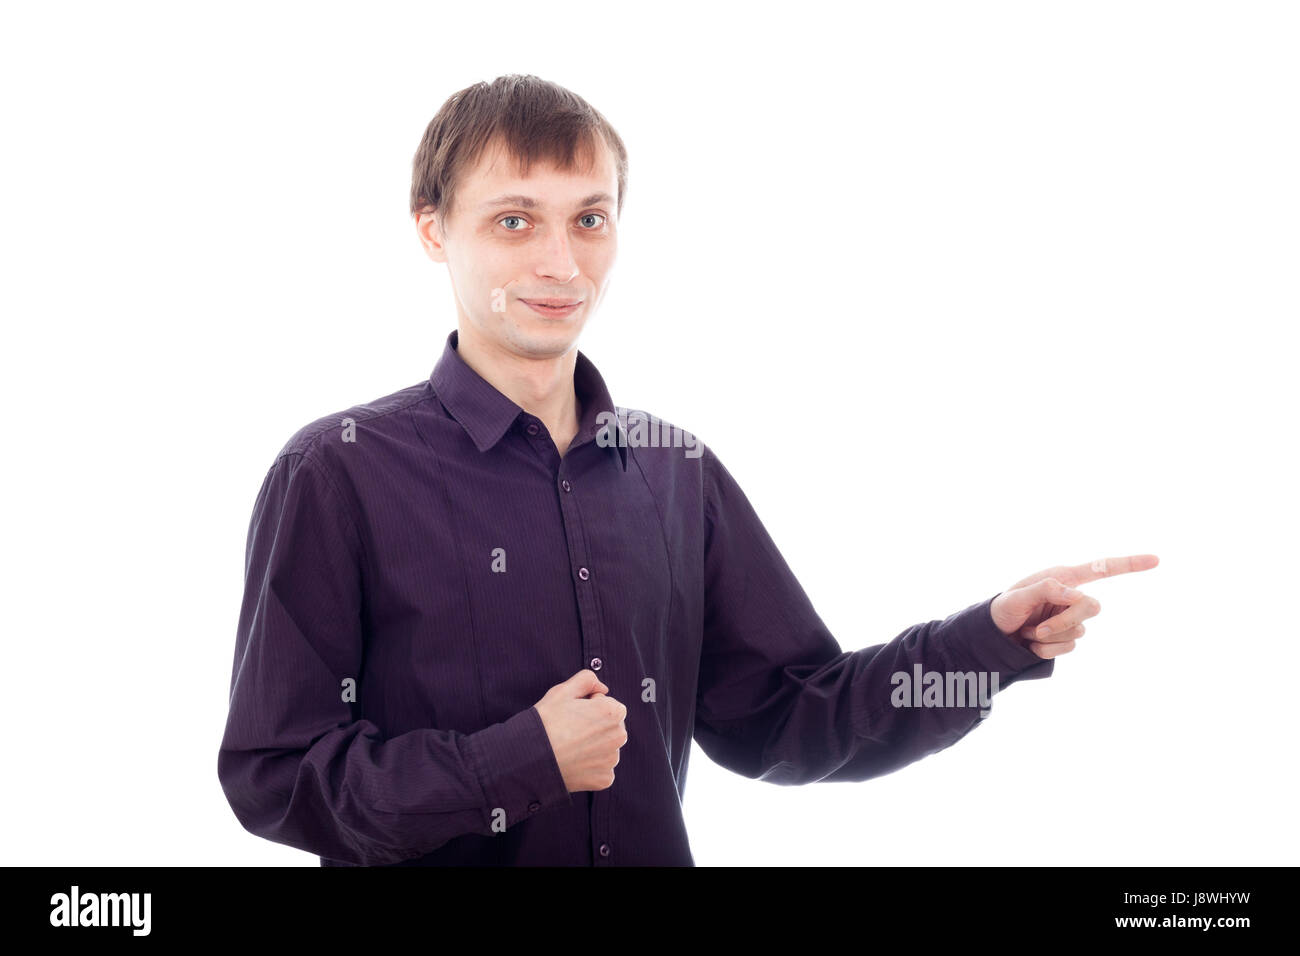 funny, pointing, man, gesture, humans, human beings, people, folk, persons, Stock Photo